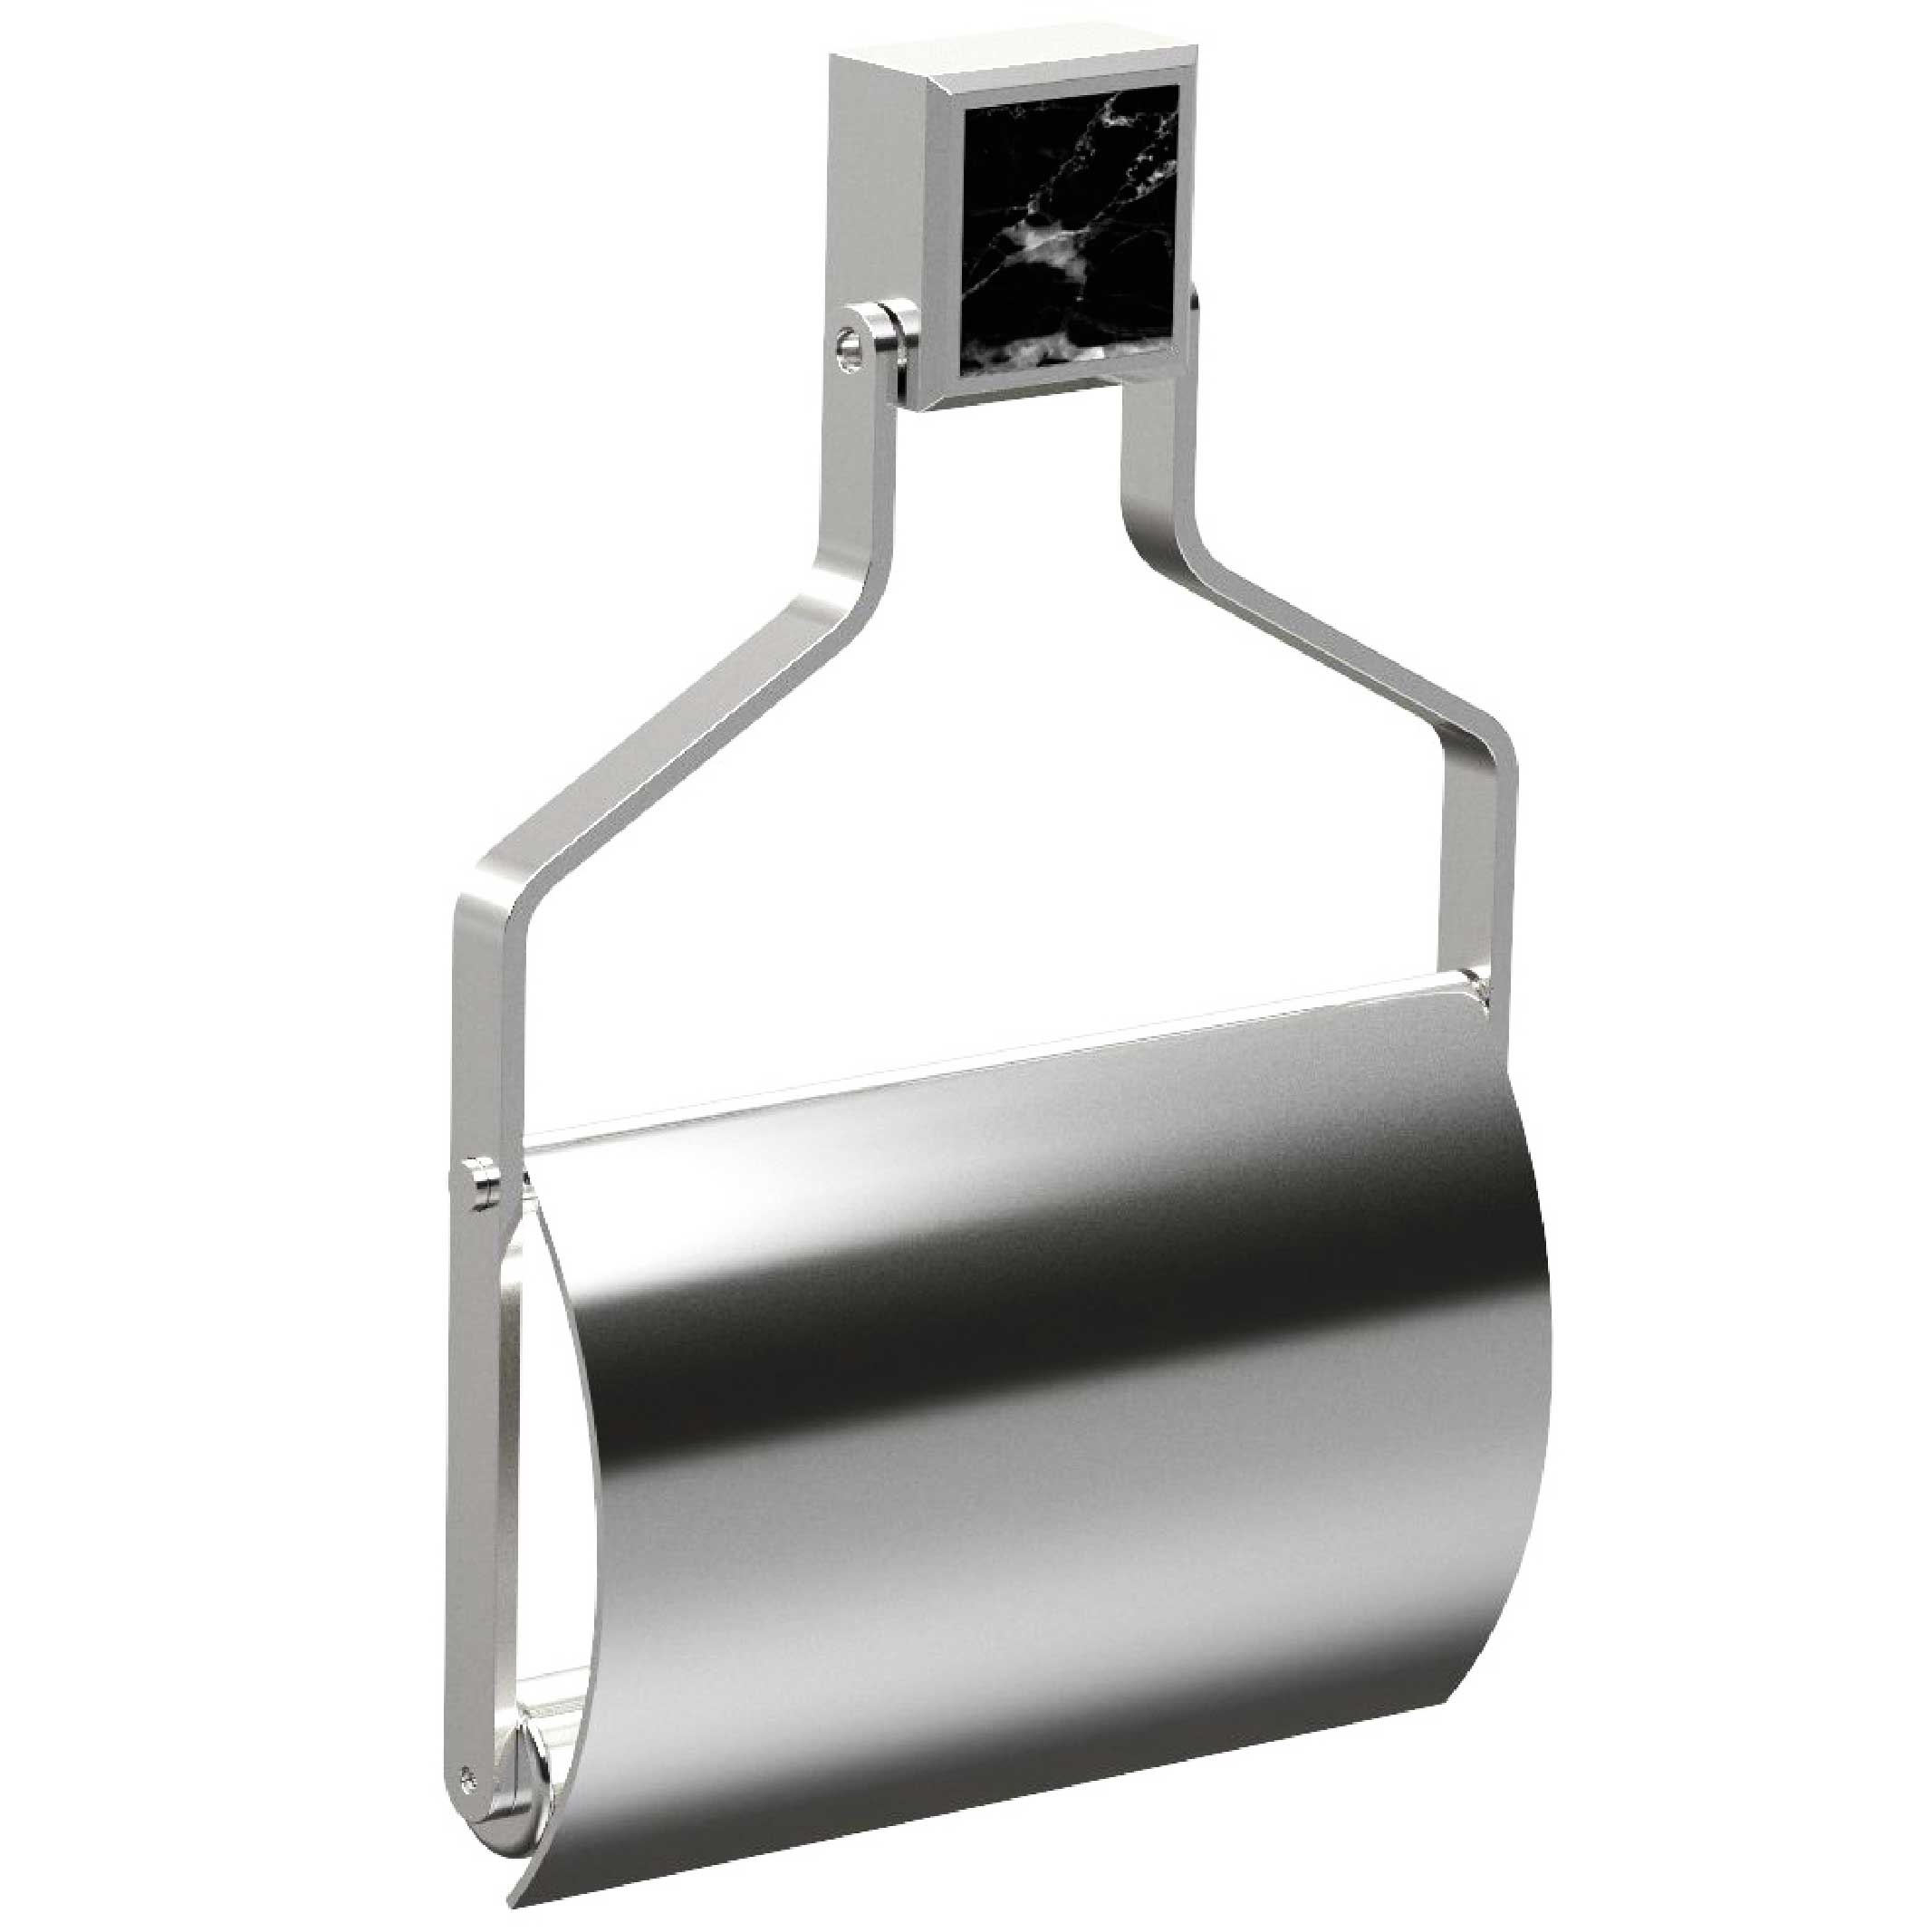 S05-503 Wall mounted toilet roll holder